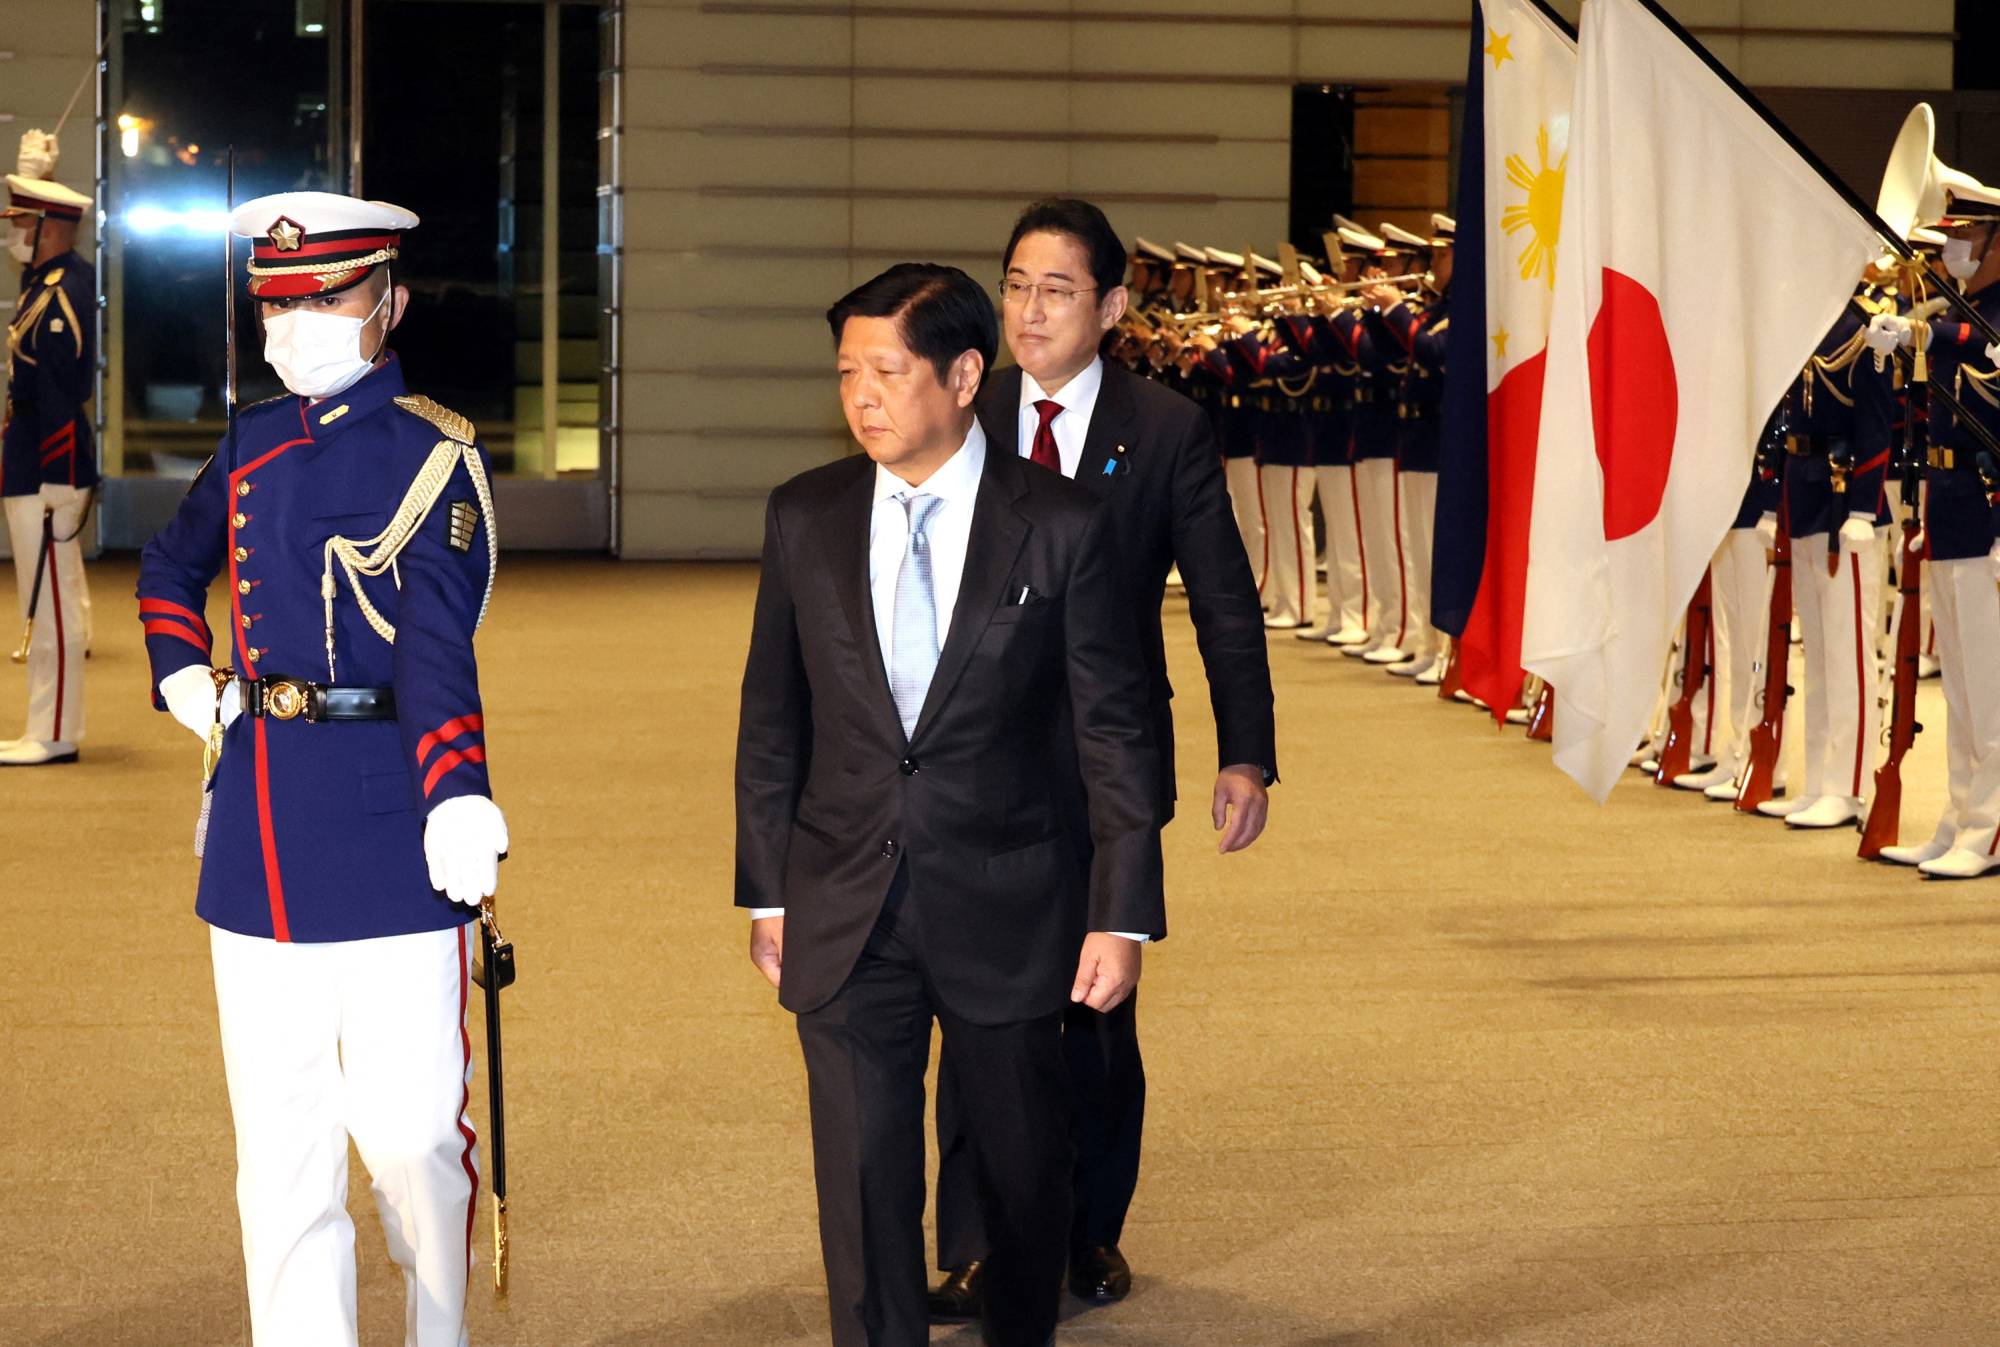 Prime Minister Fumio Kishida and Philippine President Ferdinand Marcos Jr. review an honor guard at the Prime Minister's Official Residence in Tokyo on Feb. 9. | POOL VIA REUTERS